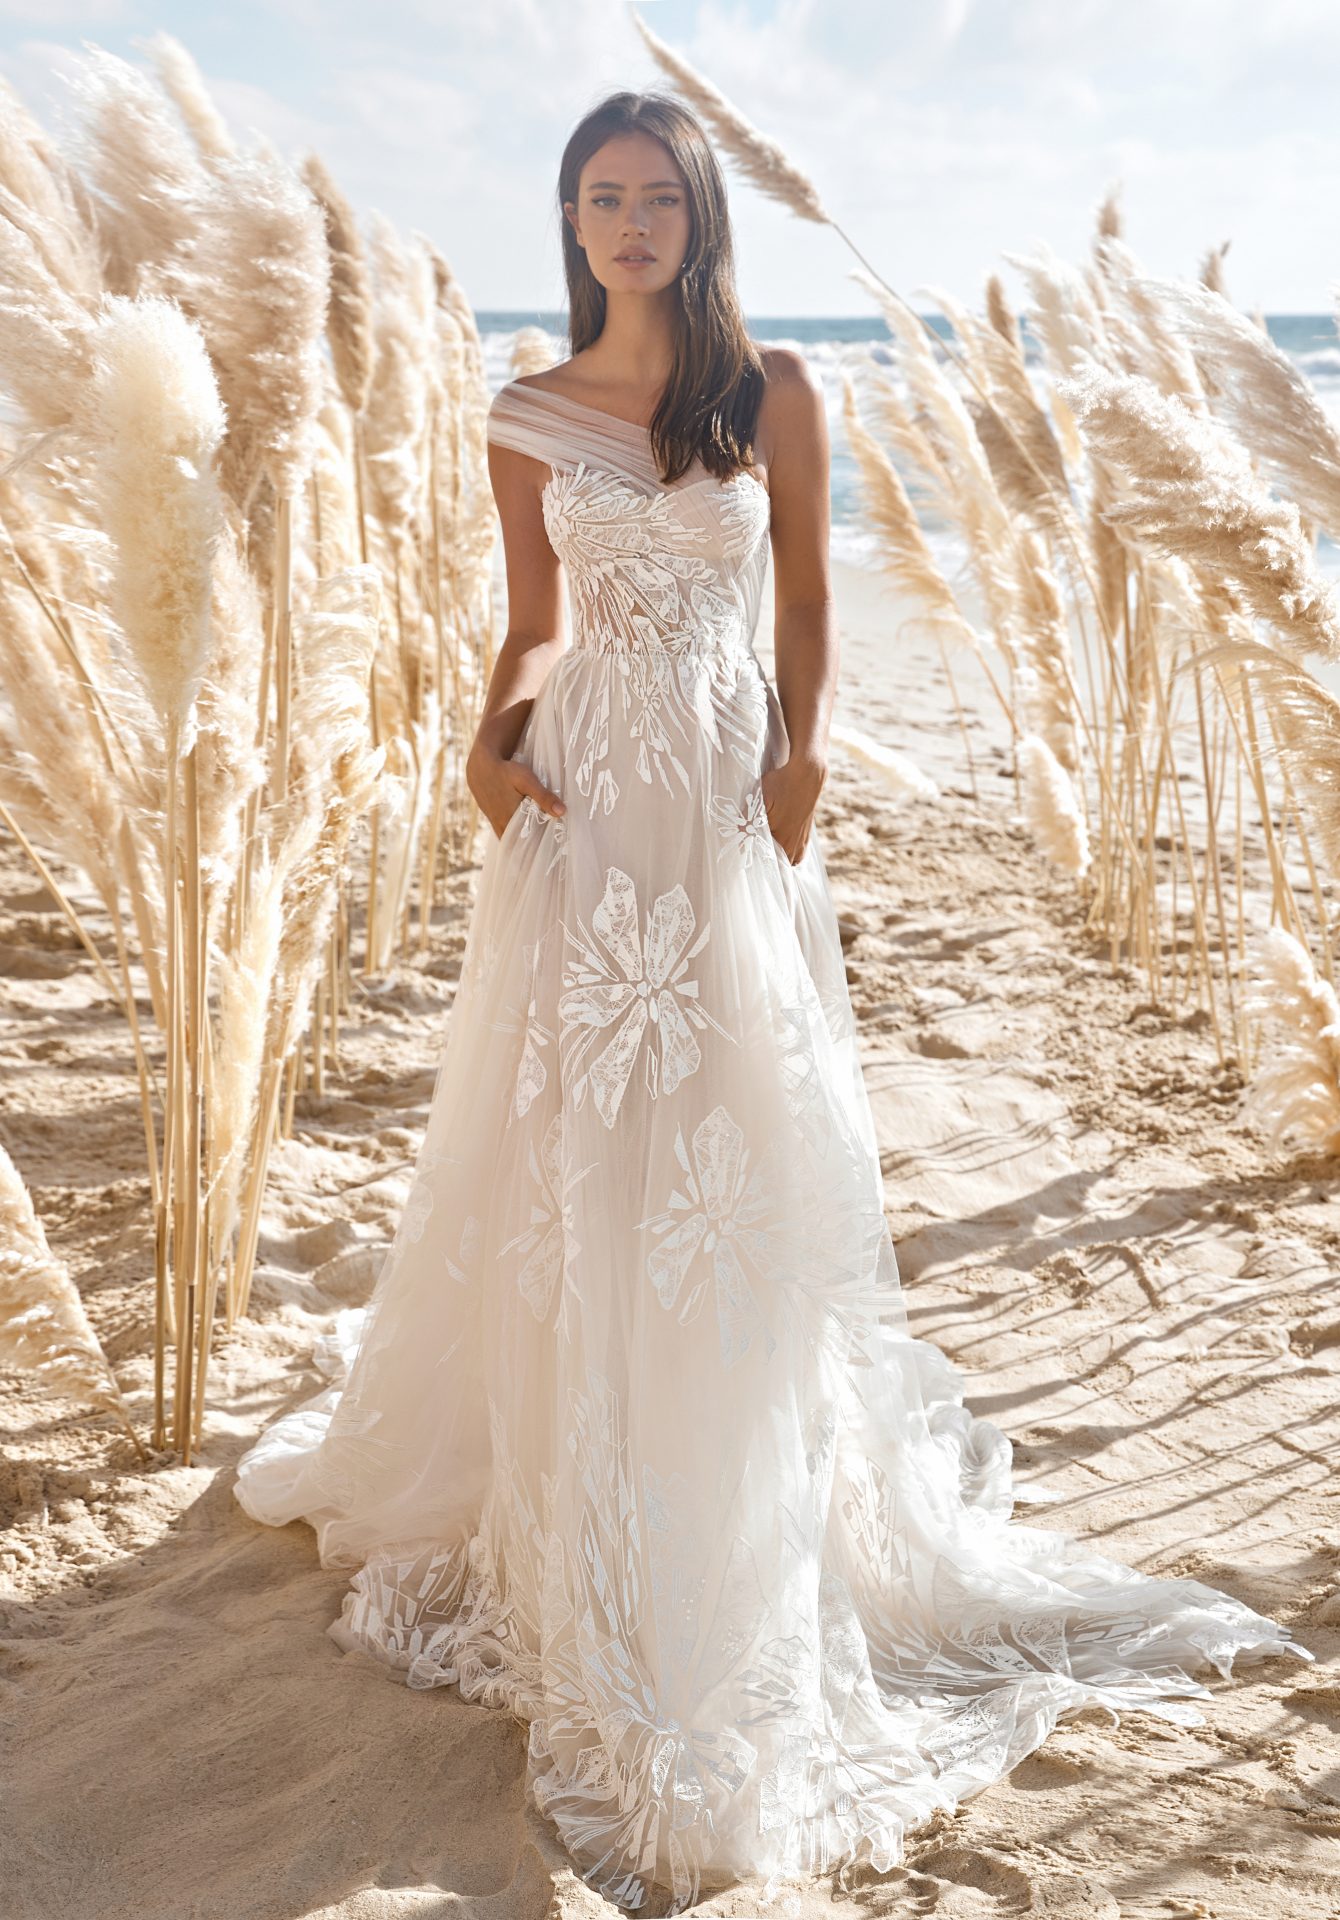 bride on a beach wearing a tulle and lace one shoulder wedding dress by lee petra grebenau from dimitras bridal chicago